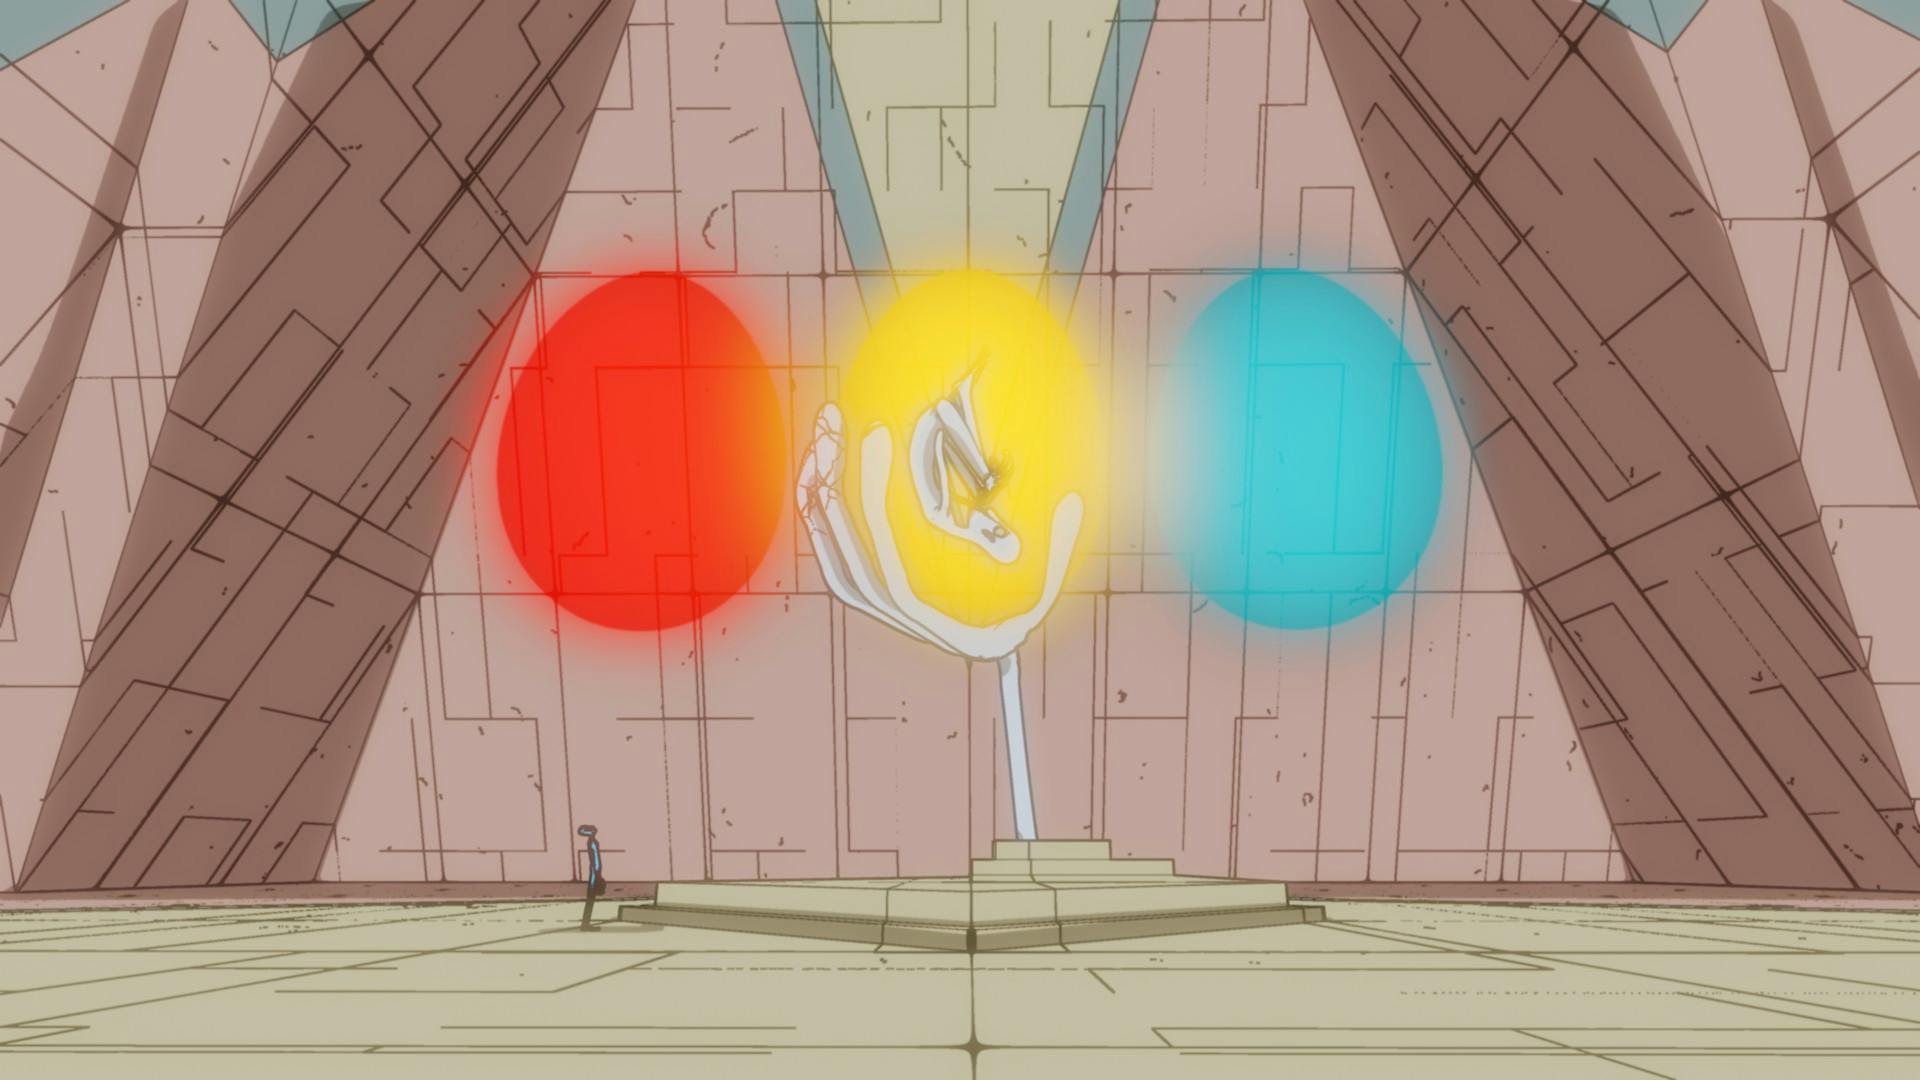 A cartoon figure looking up at a giant curled-up statue suspended in a glowing egg